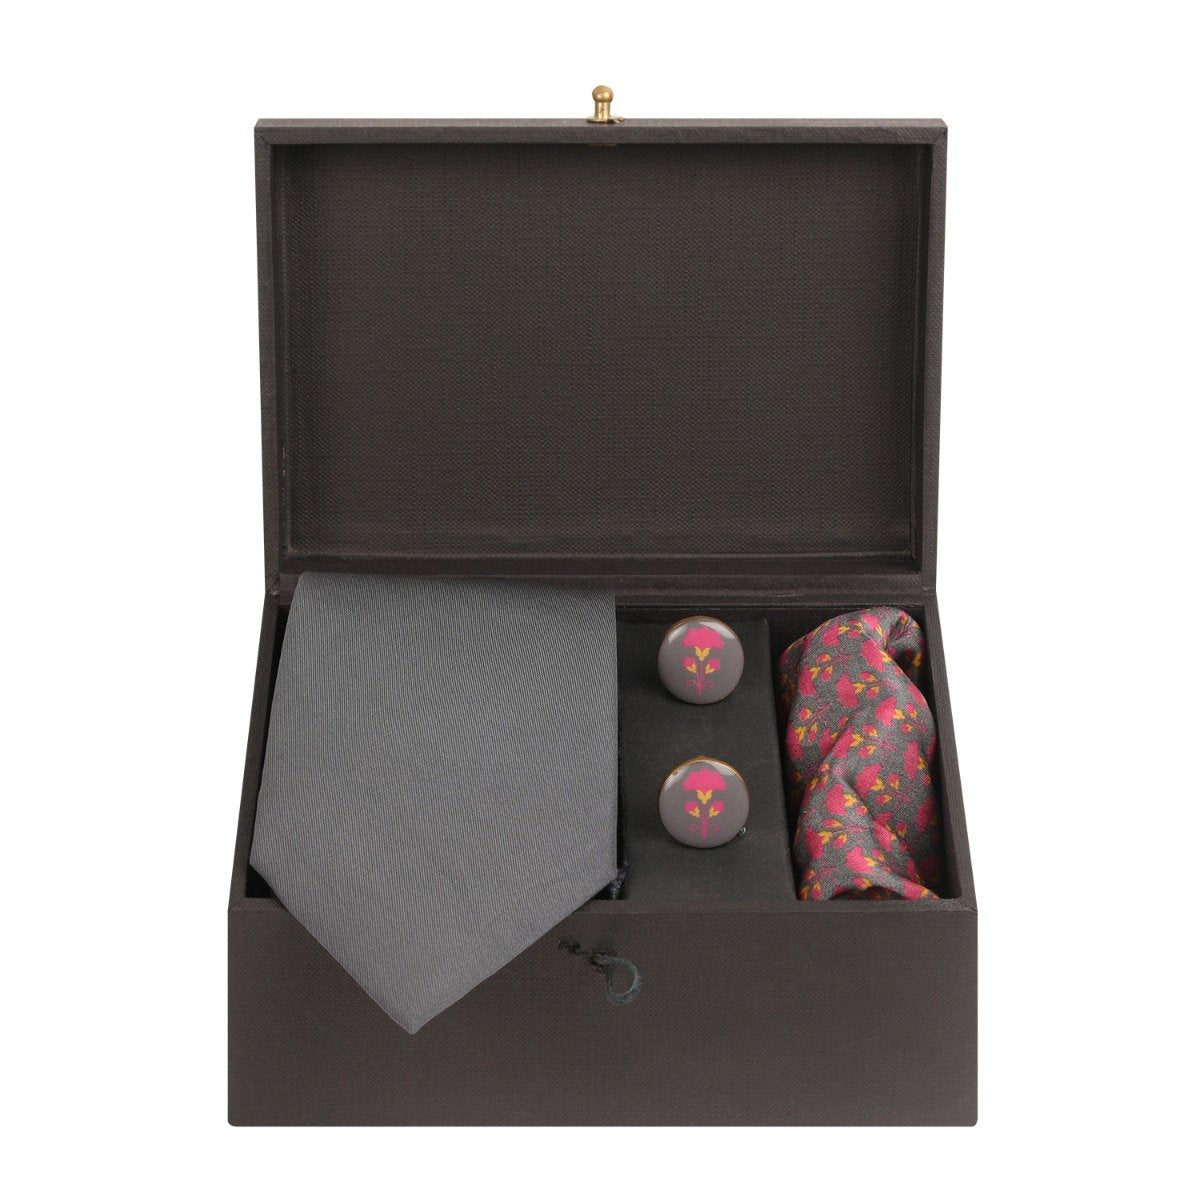 Chokore Grey color 3-in-1 Gift set